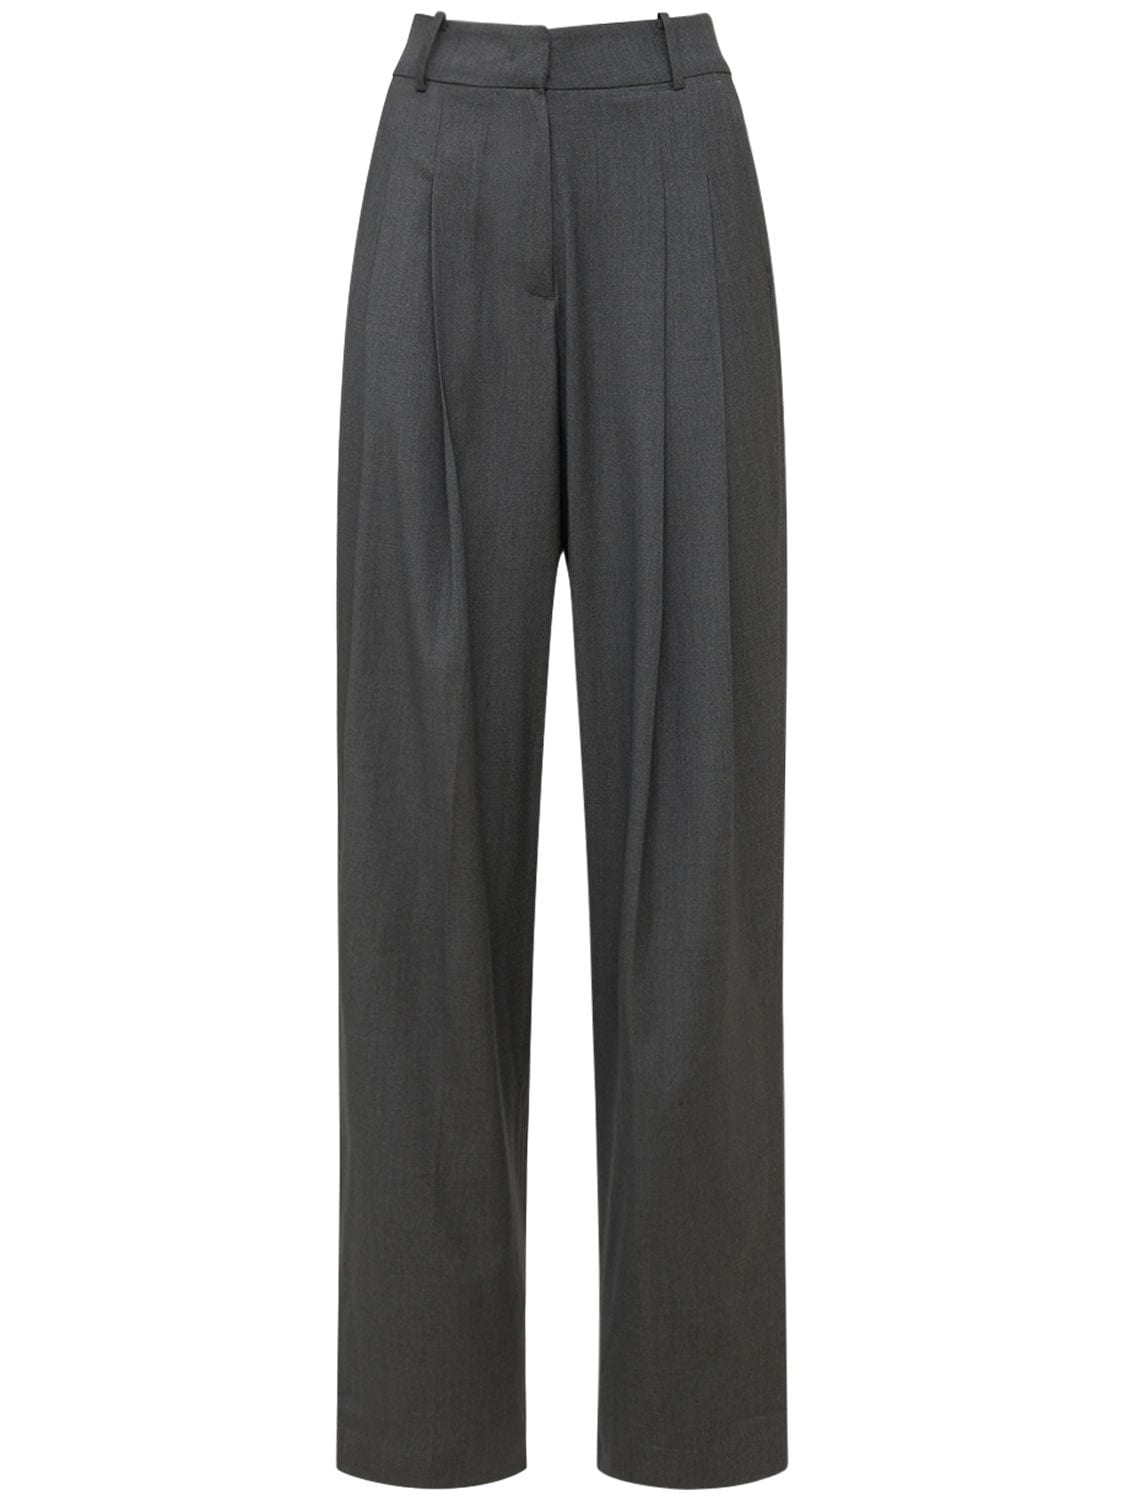 THE FRANKIE SHOP GELSO HIGH RISE PLEATED WOVEN WIDE trousers